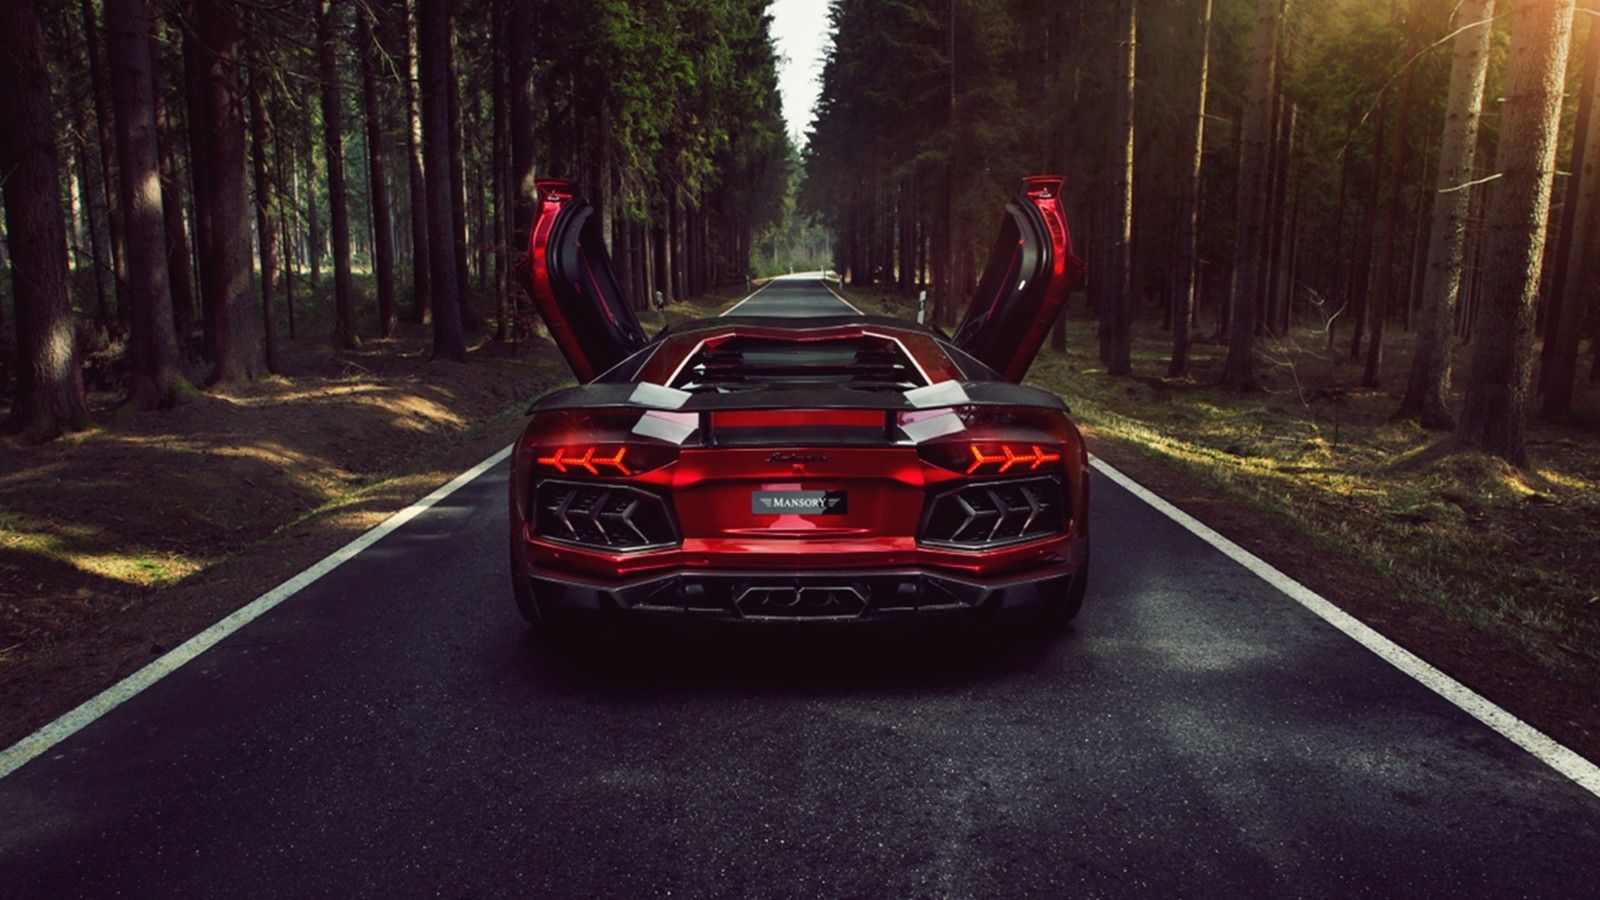 Exotic Cars Hd Wallpapers